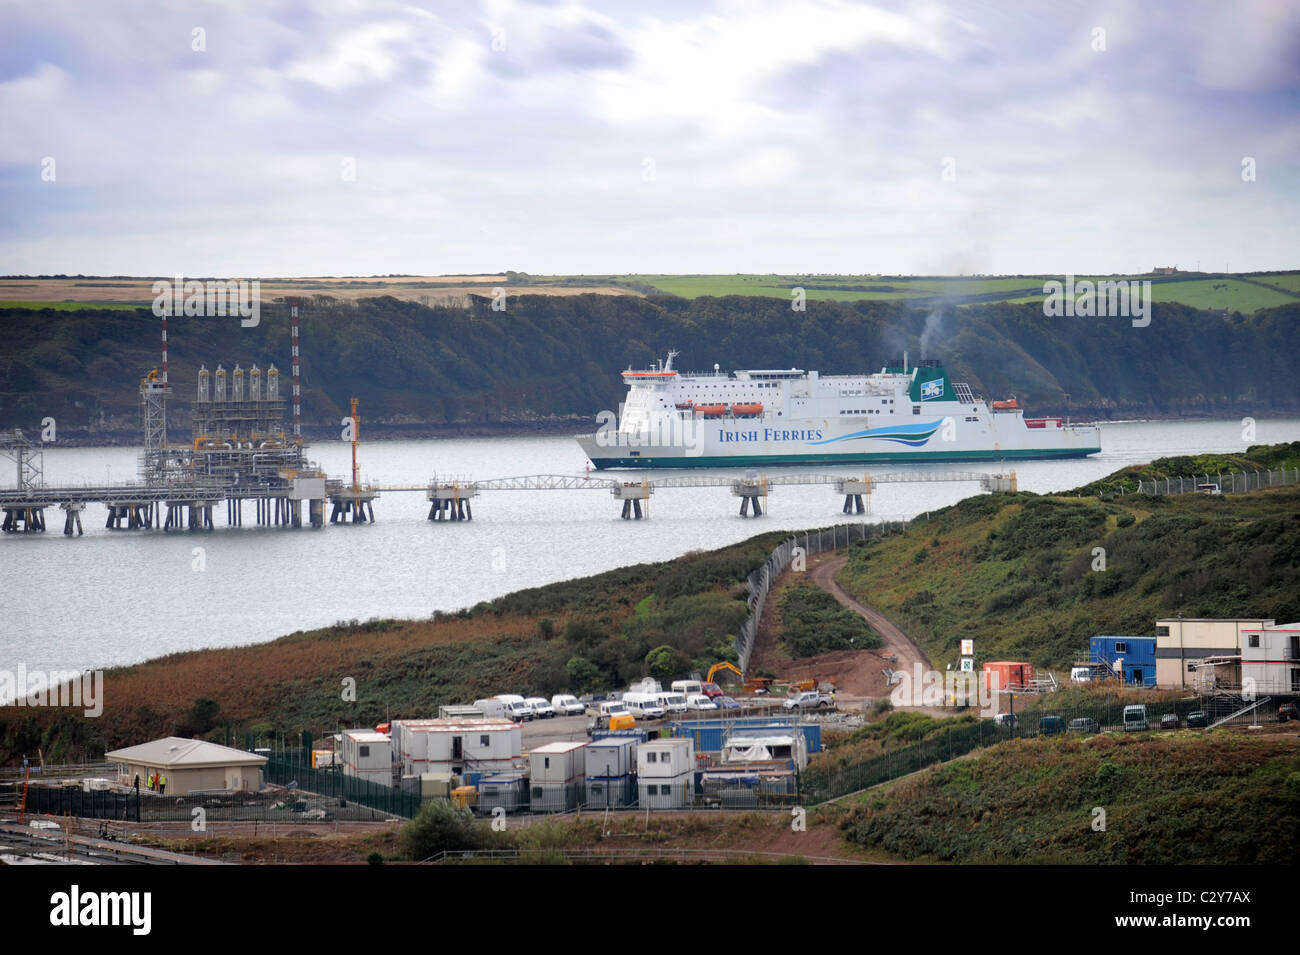 View from Milford Haven with oil refinery moorings and an Irish Ferries passenger ship Wales UK Stock Photo